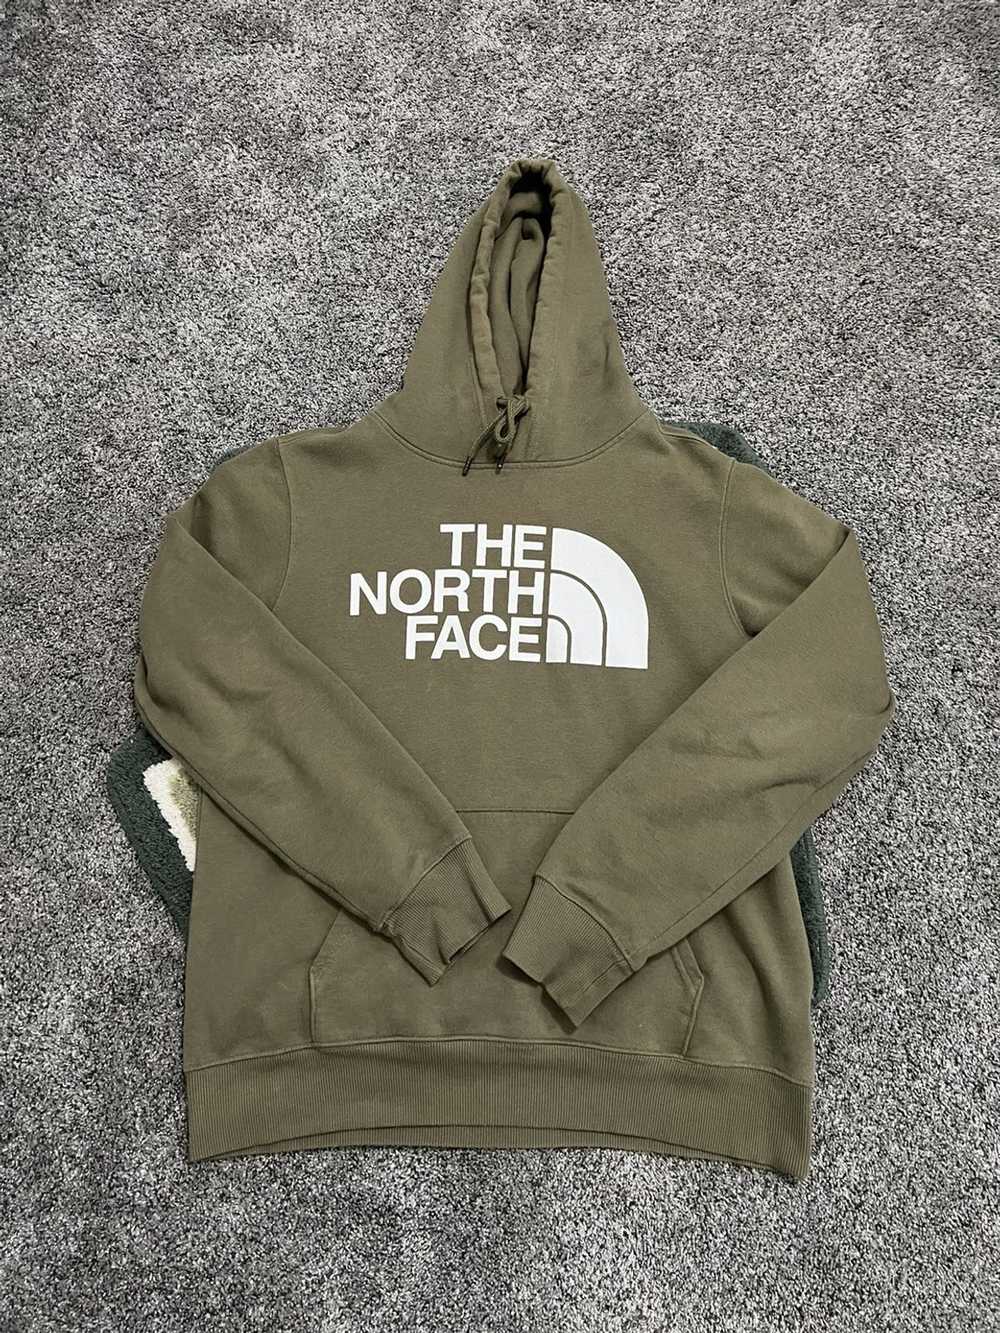 The North Face Olive North Face Hoodie - image 2